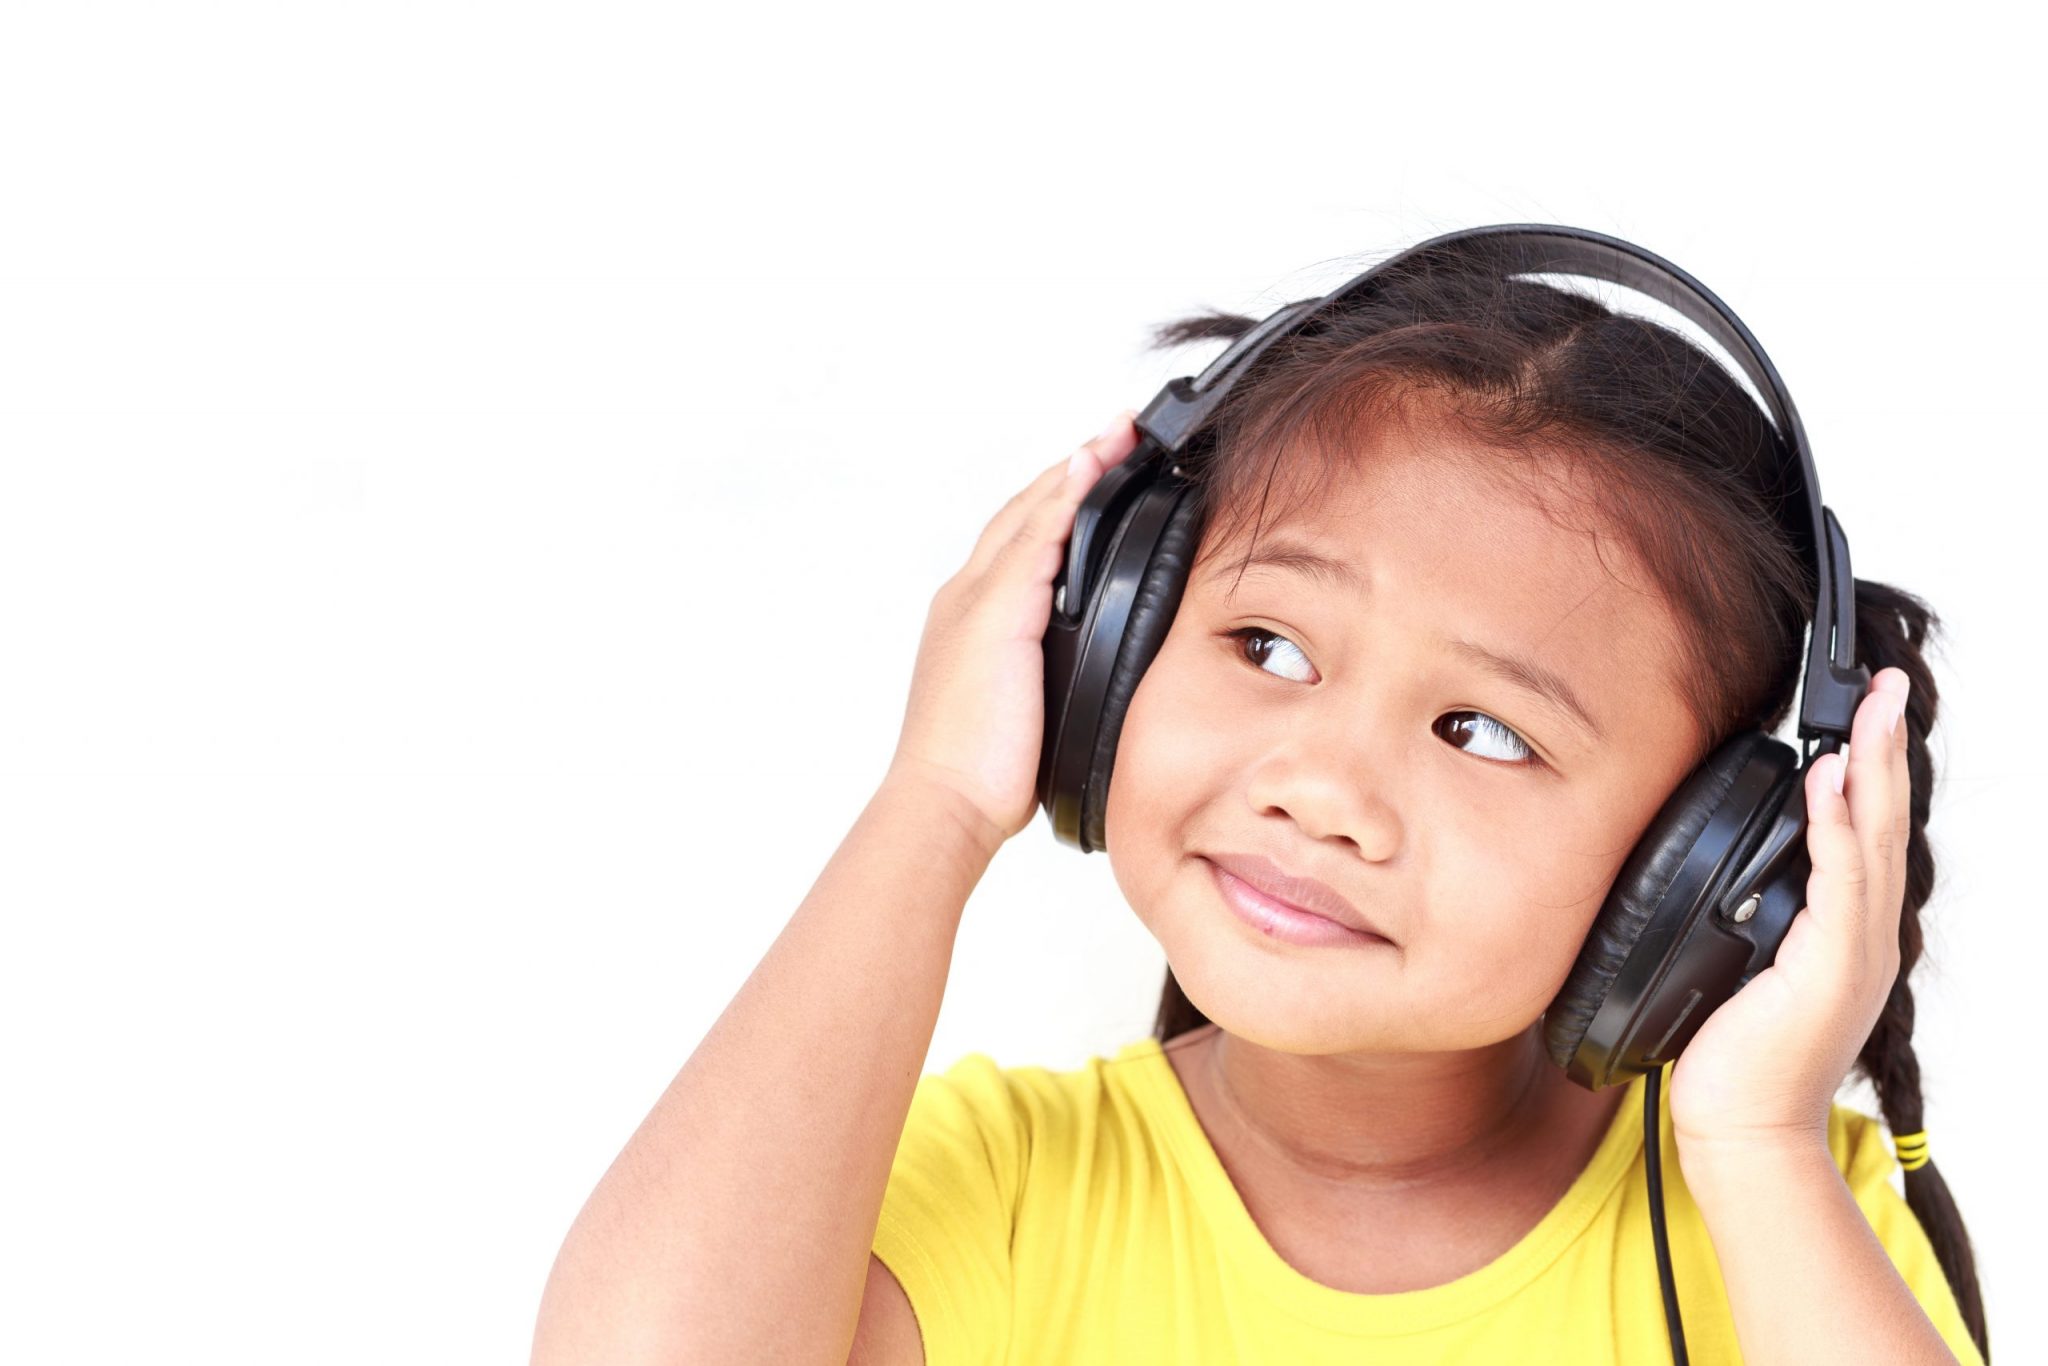 adhd auditory processing